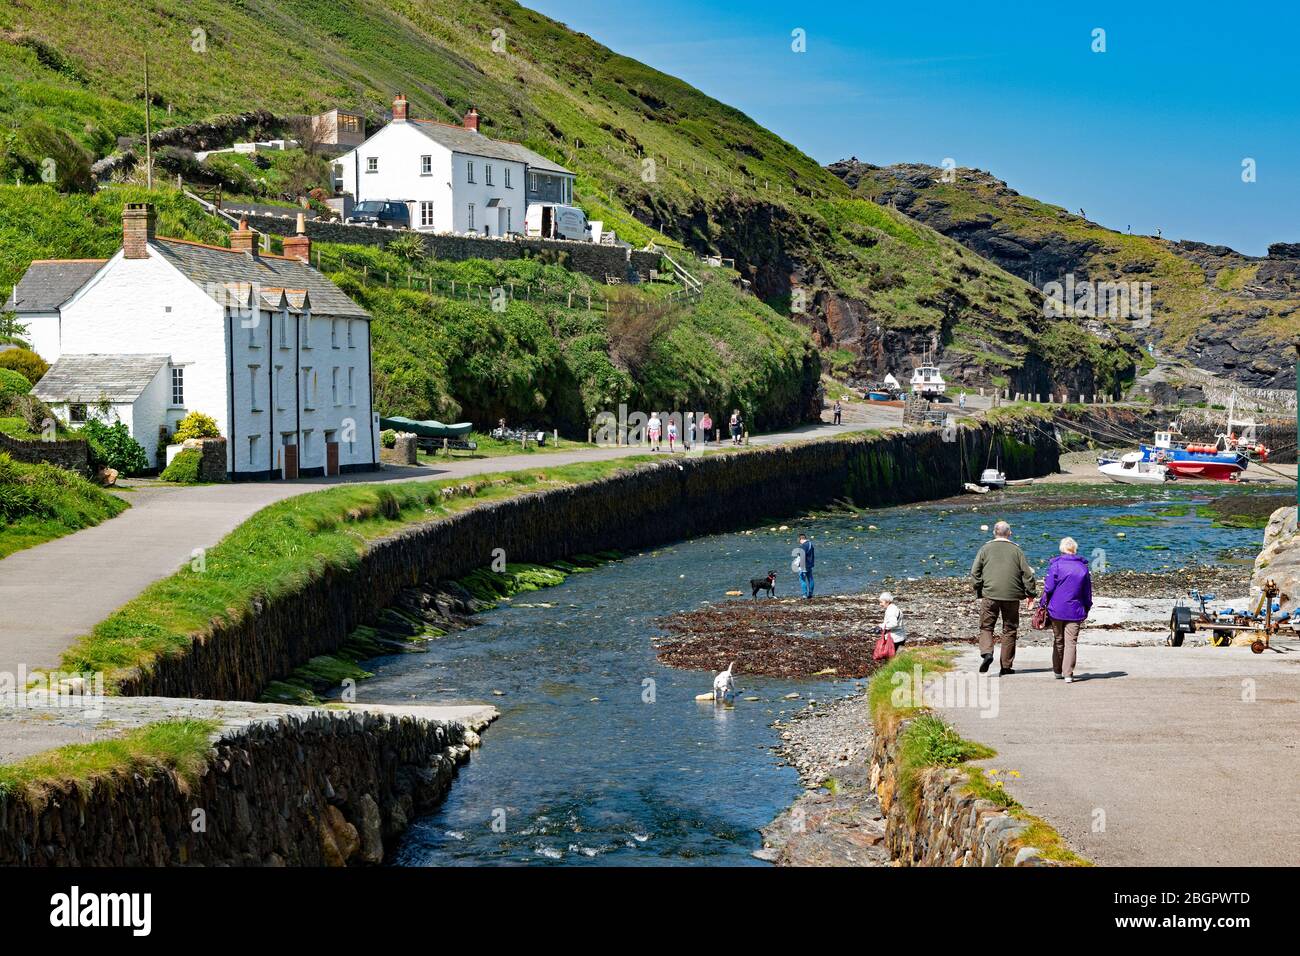 the historic harbour at boscastle in cornwall, england Stock Photo